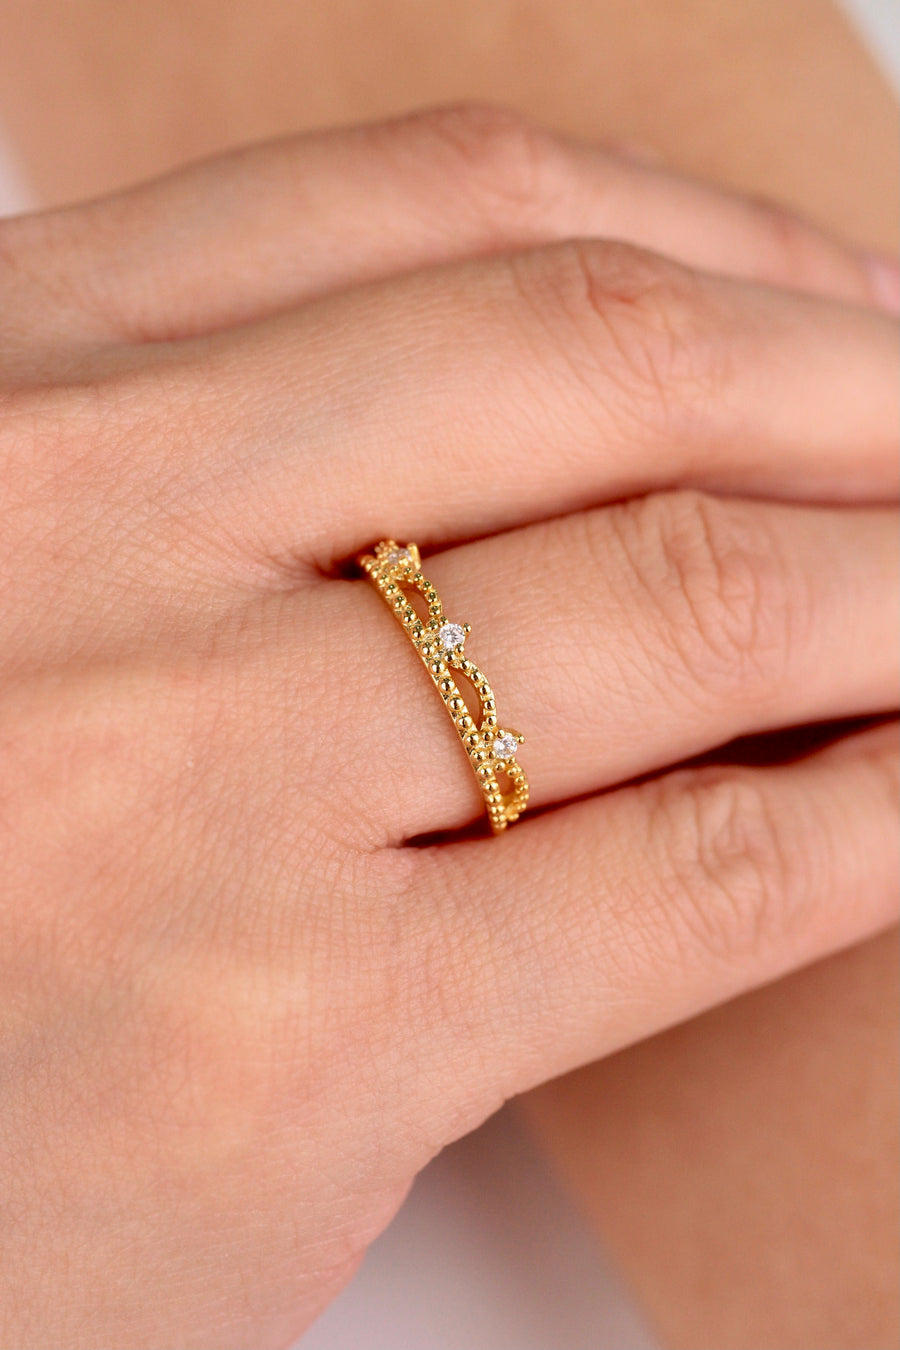 The Crown Gold Plated Diamond Ring